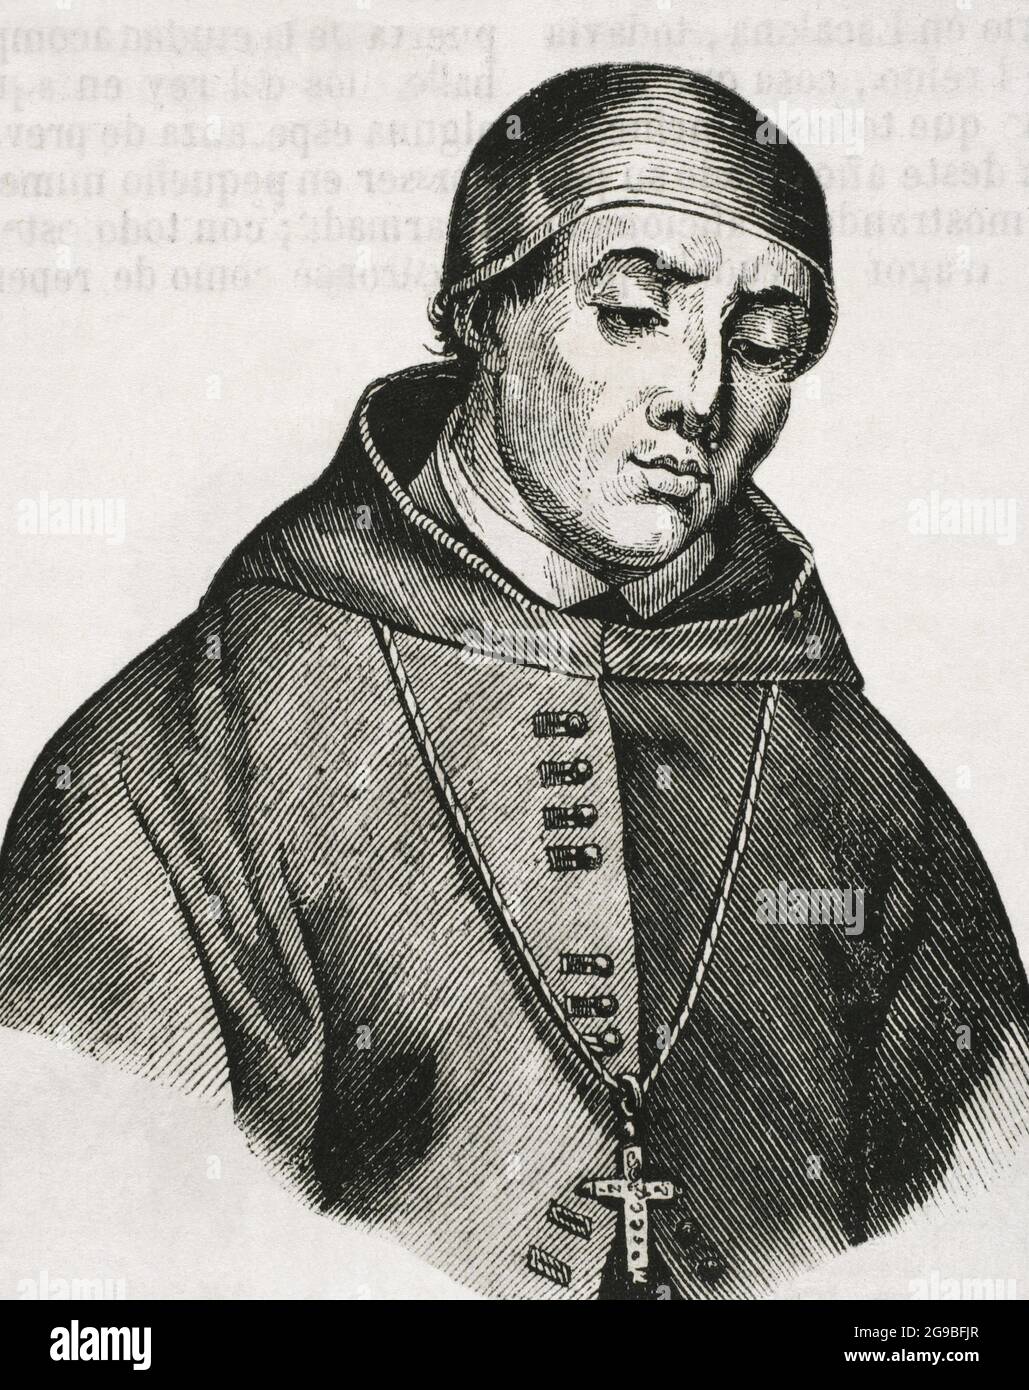 Alonso Fernández de Madrigal, known as Alonso Tostado (1410-1455). Spanish clergyman, academicist and writer. Bishop of Avila 1454-1455. Portrait. Engraving. Historia General de España by Father Mariana. Madrid, 1852. Stock Photo